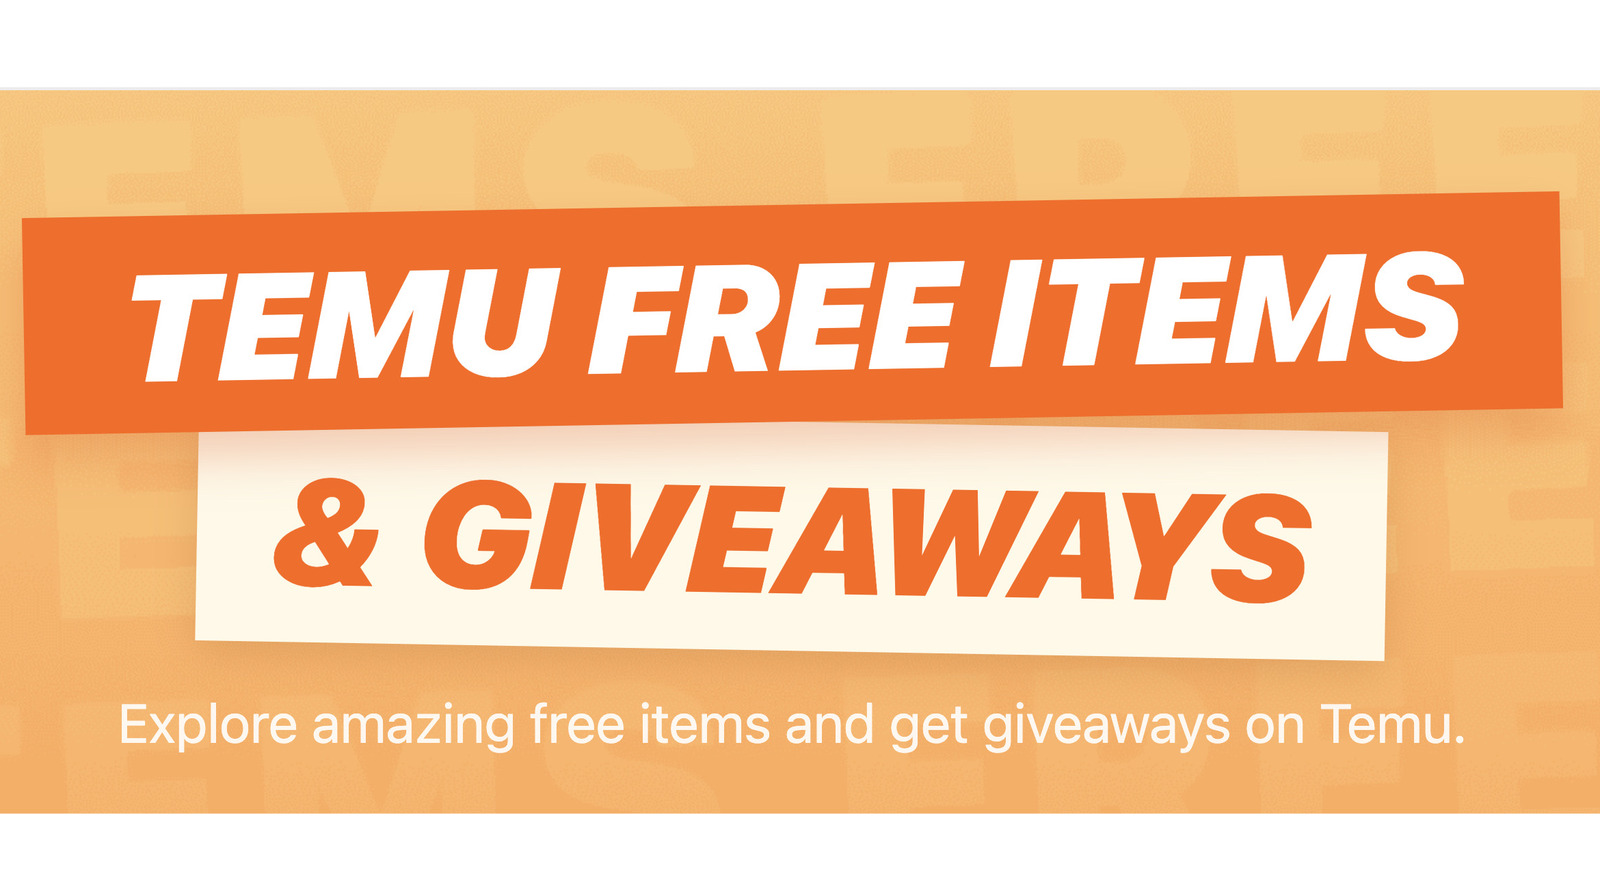 Free Items On TEMU: What's The Catch?